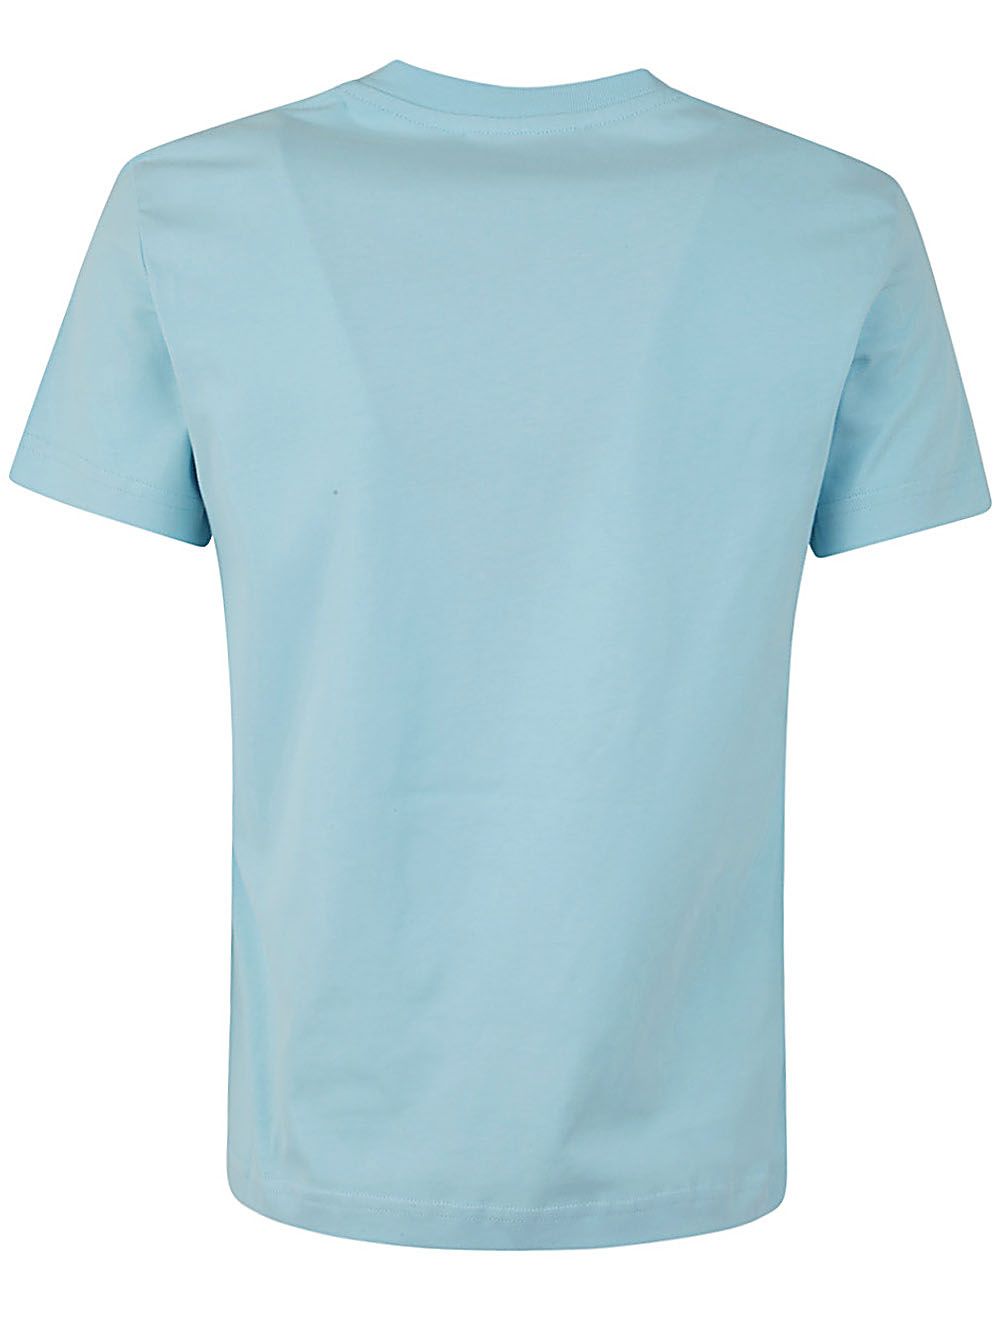 Shop Casablanca Tennis Club Icon Printed Fitted T In Blue